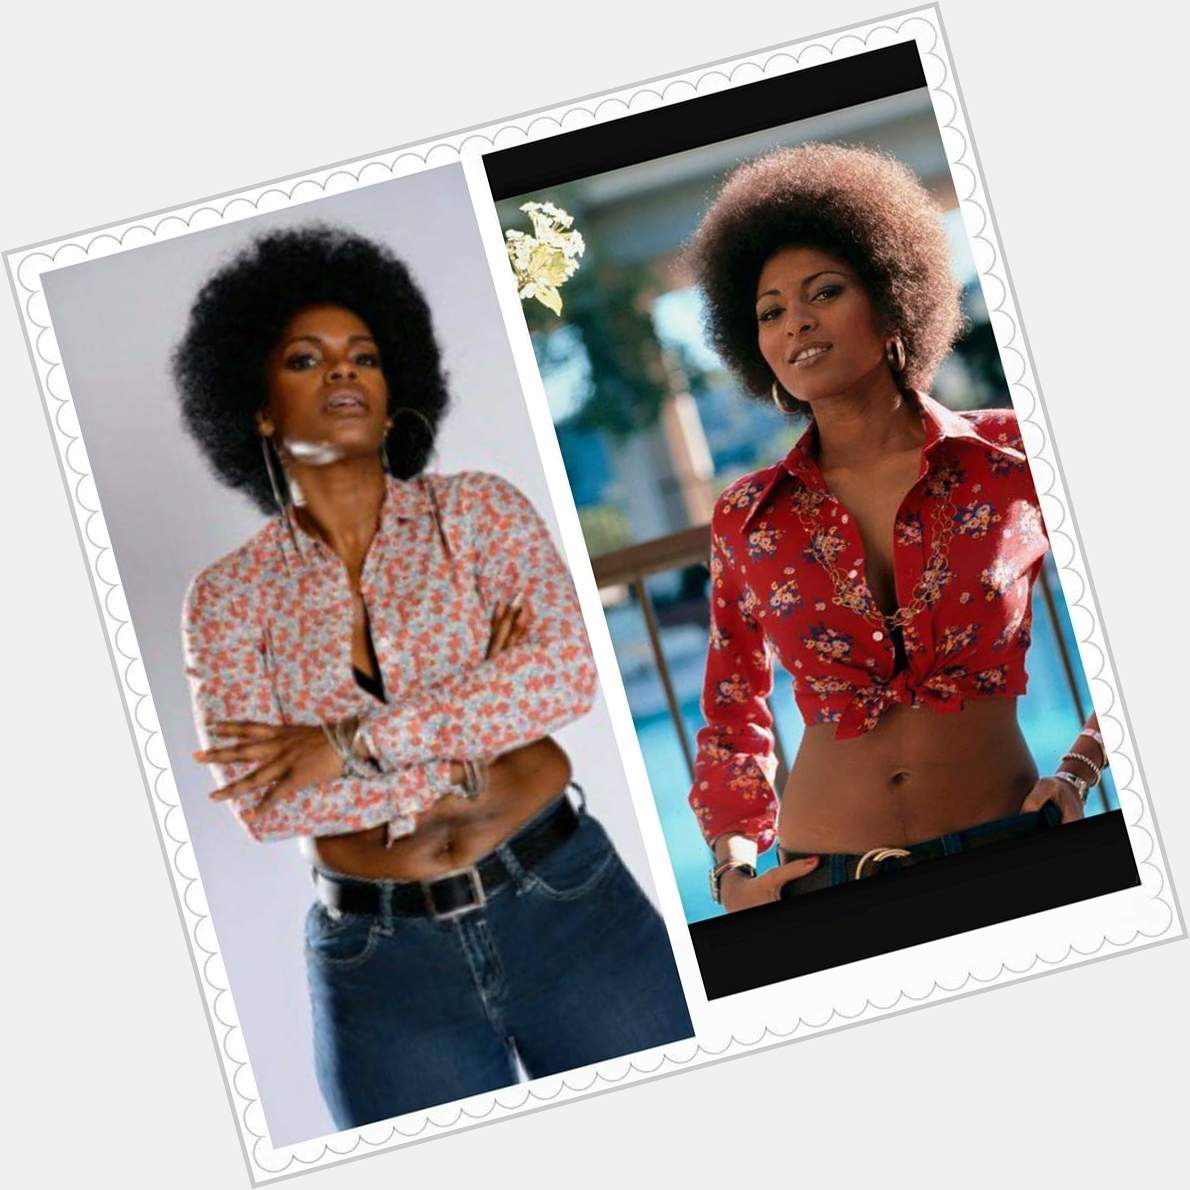 RockStar Cali Thunder\s true life inspiration is Pam Grier! We salute you Foxy Brown. HAPPY BIRTHDAY! 